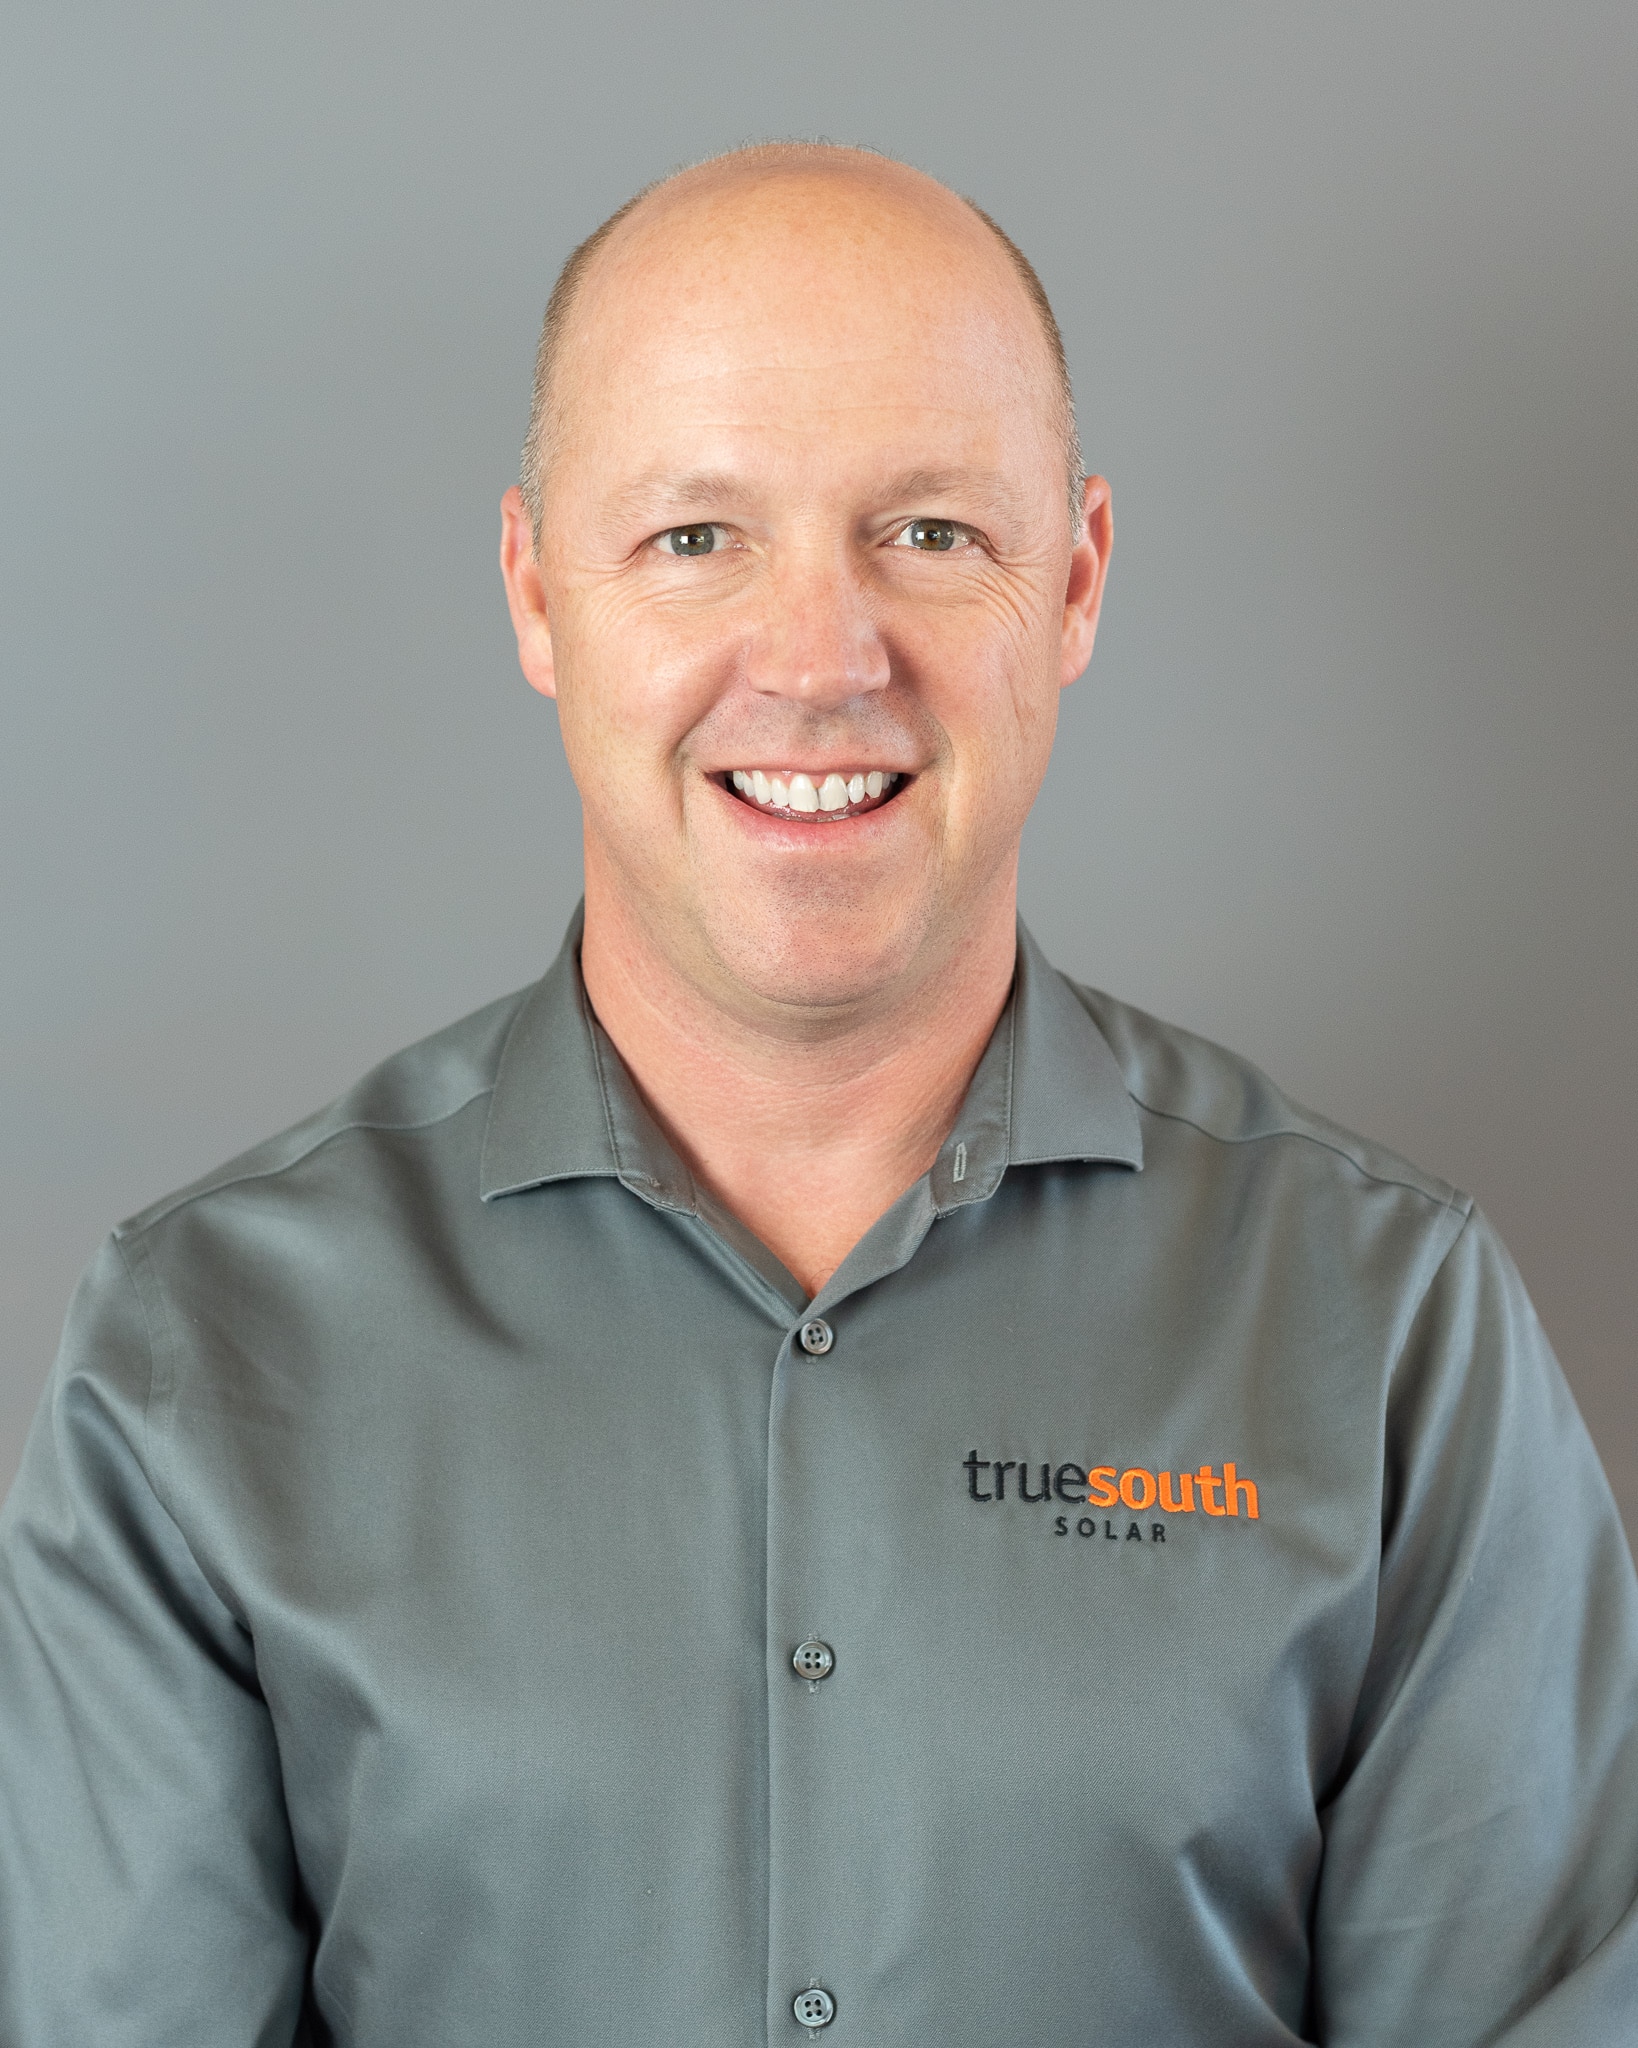 Michael Stringer - a member of the True South Solar team. We are your local solar experts.